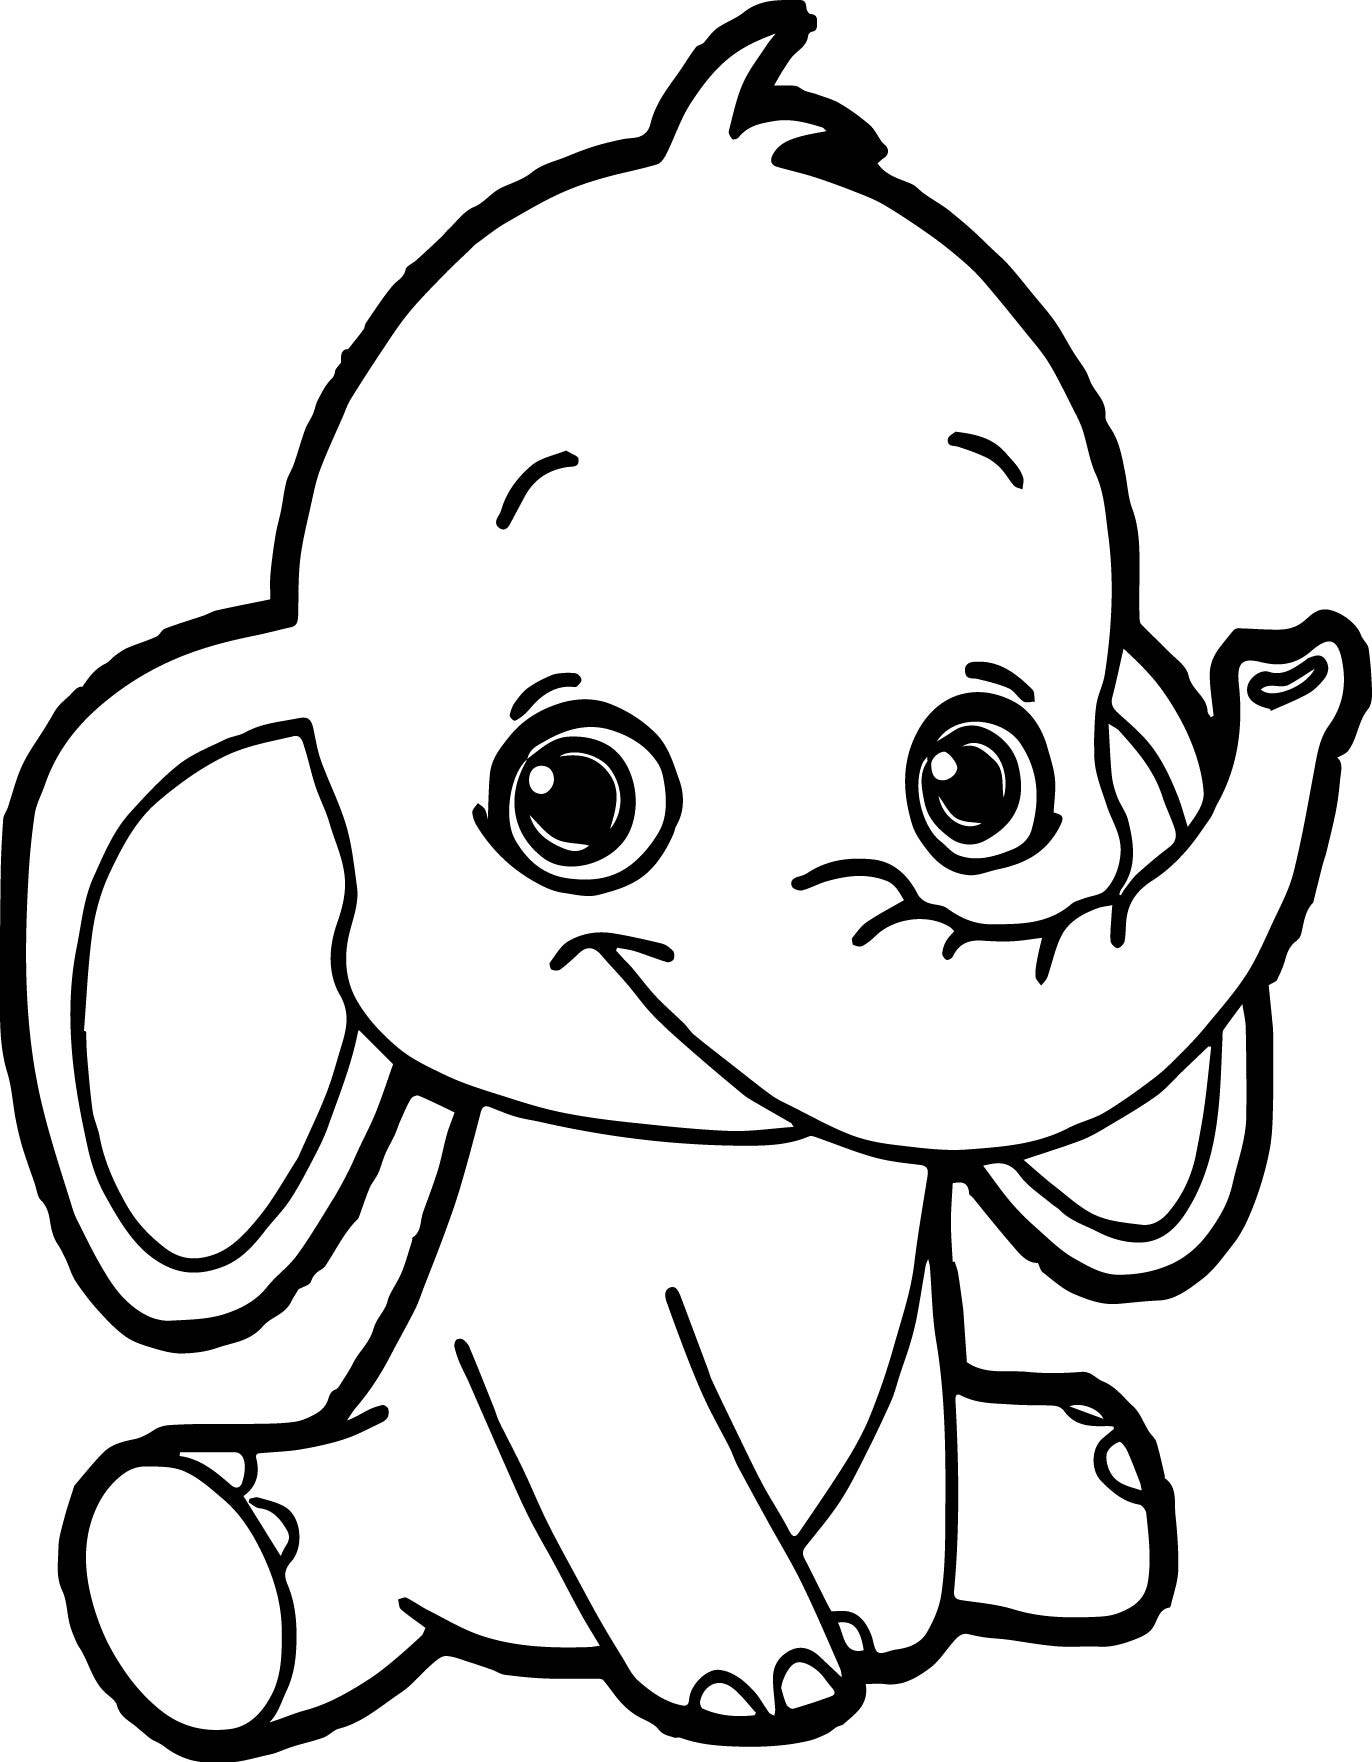 The 21 Best Ideas for Cute Baby Elephant Coloring Pages Home, Family